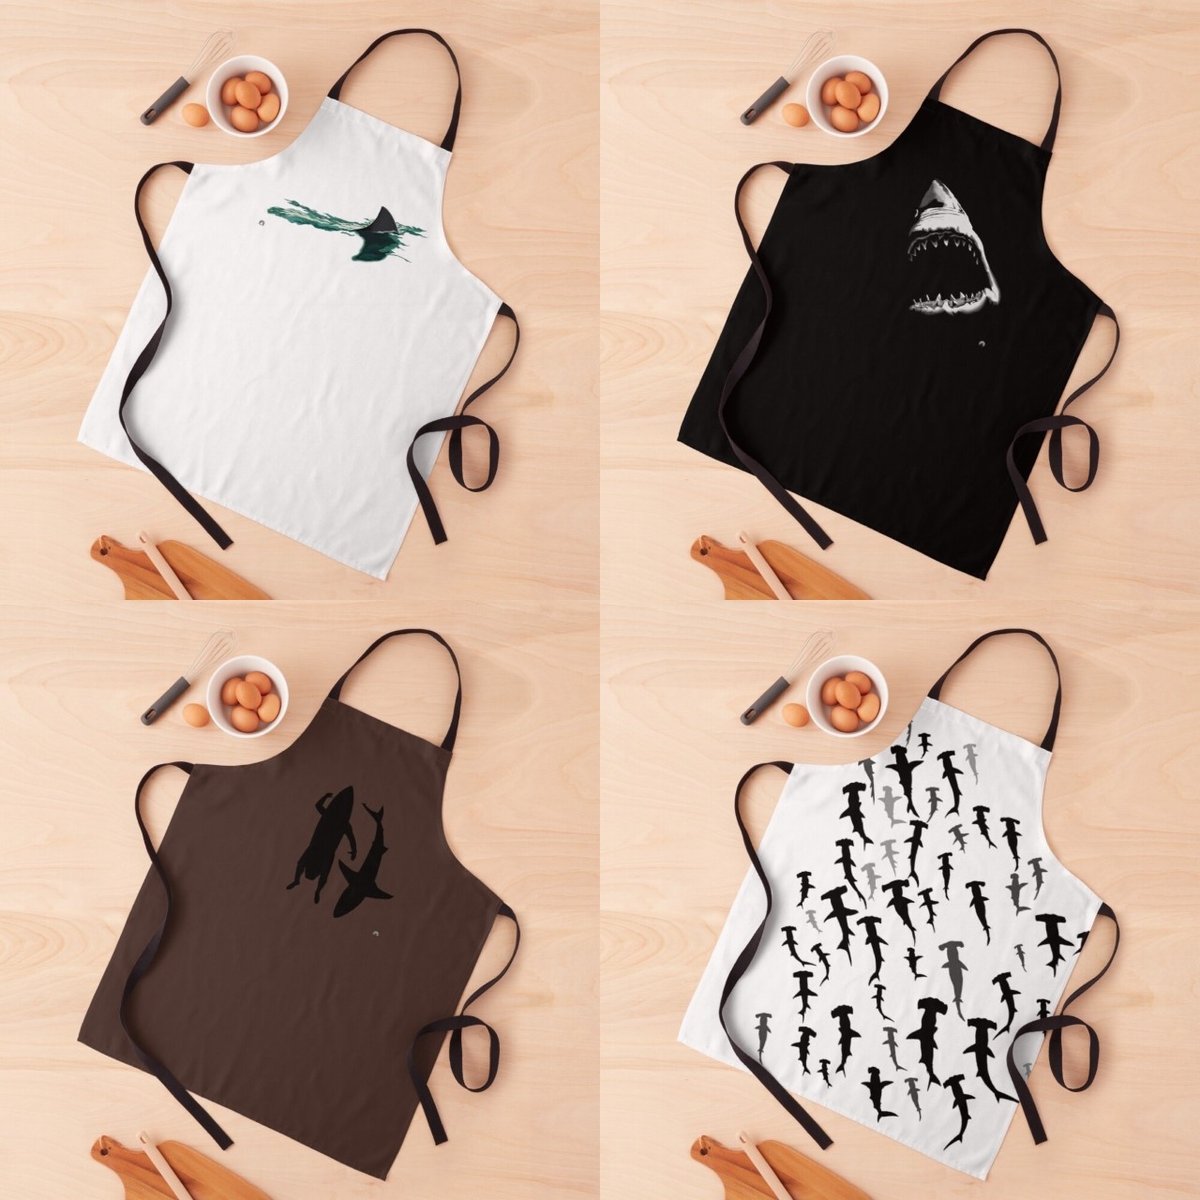 NEW APRONS AVALIABLE NOW!!⁠
What's cooking? These RED HOT new additions to the Fin Bay Designs collection.  ⁠
#aprons #cookingapron #aprondesign #conservation #diving #saltlife #marinebiology #sharkdiving #marinelife #savethesharks #savetheocean #saveourseas #oceanlove